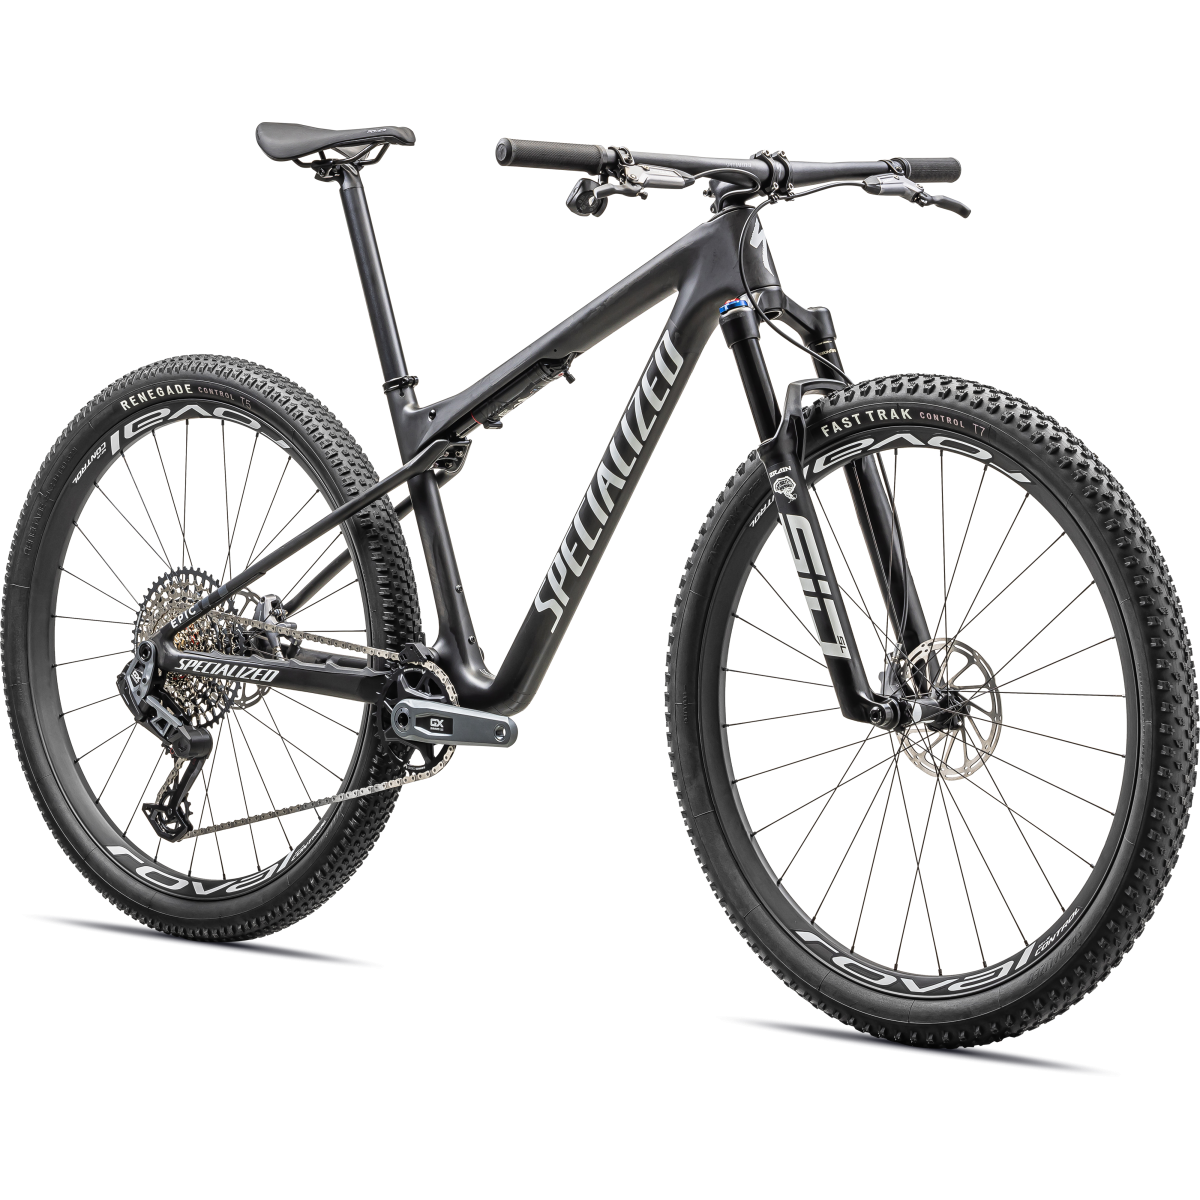 Specialized Epic World Cup Expert kalnų dviratis / Satin Carbon - White Pearl